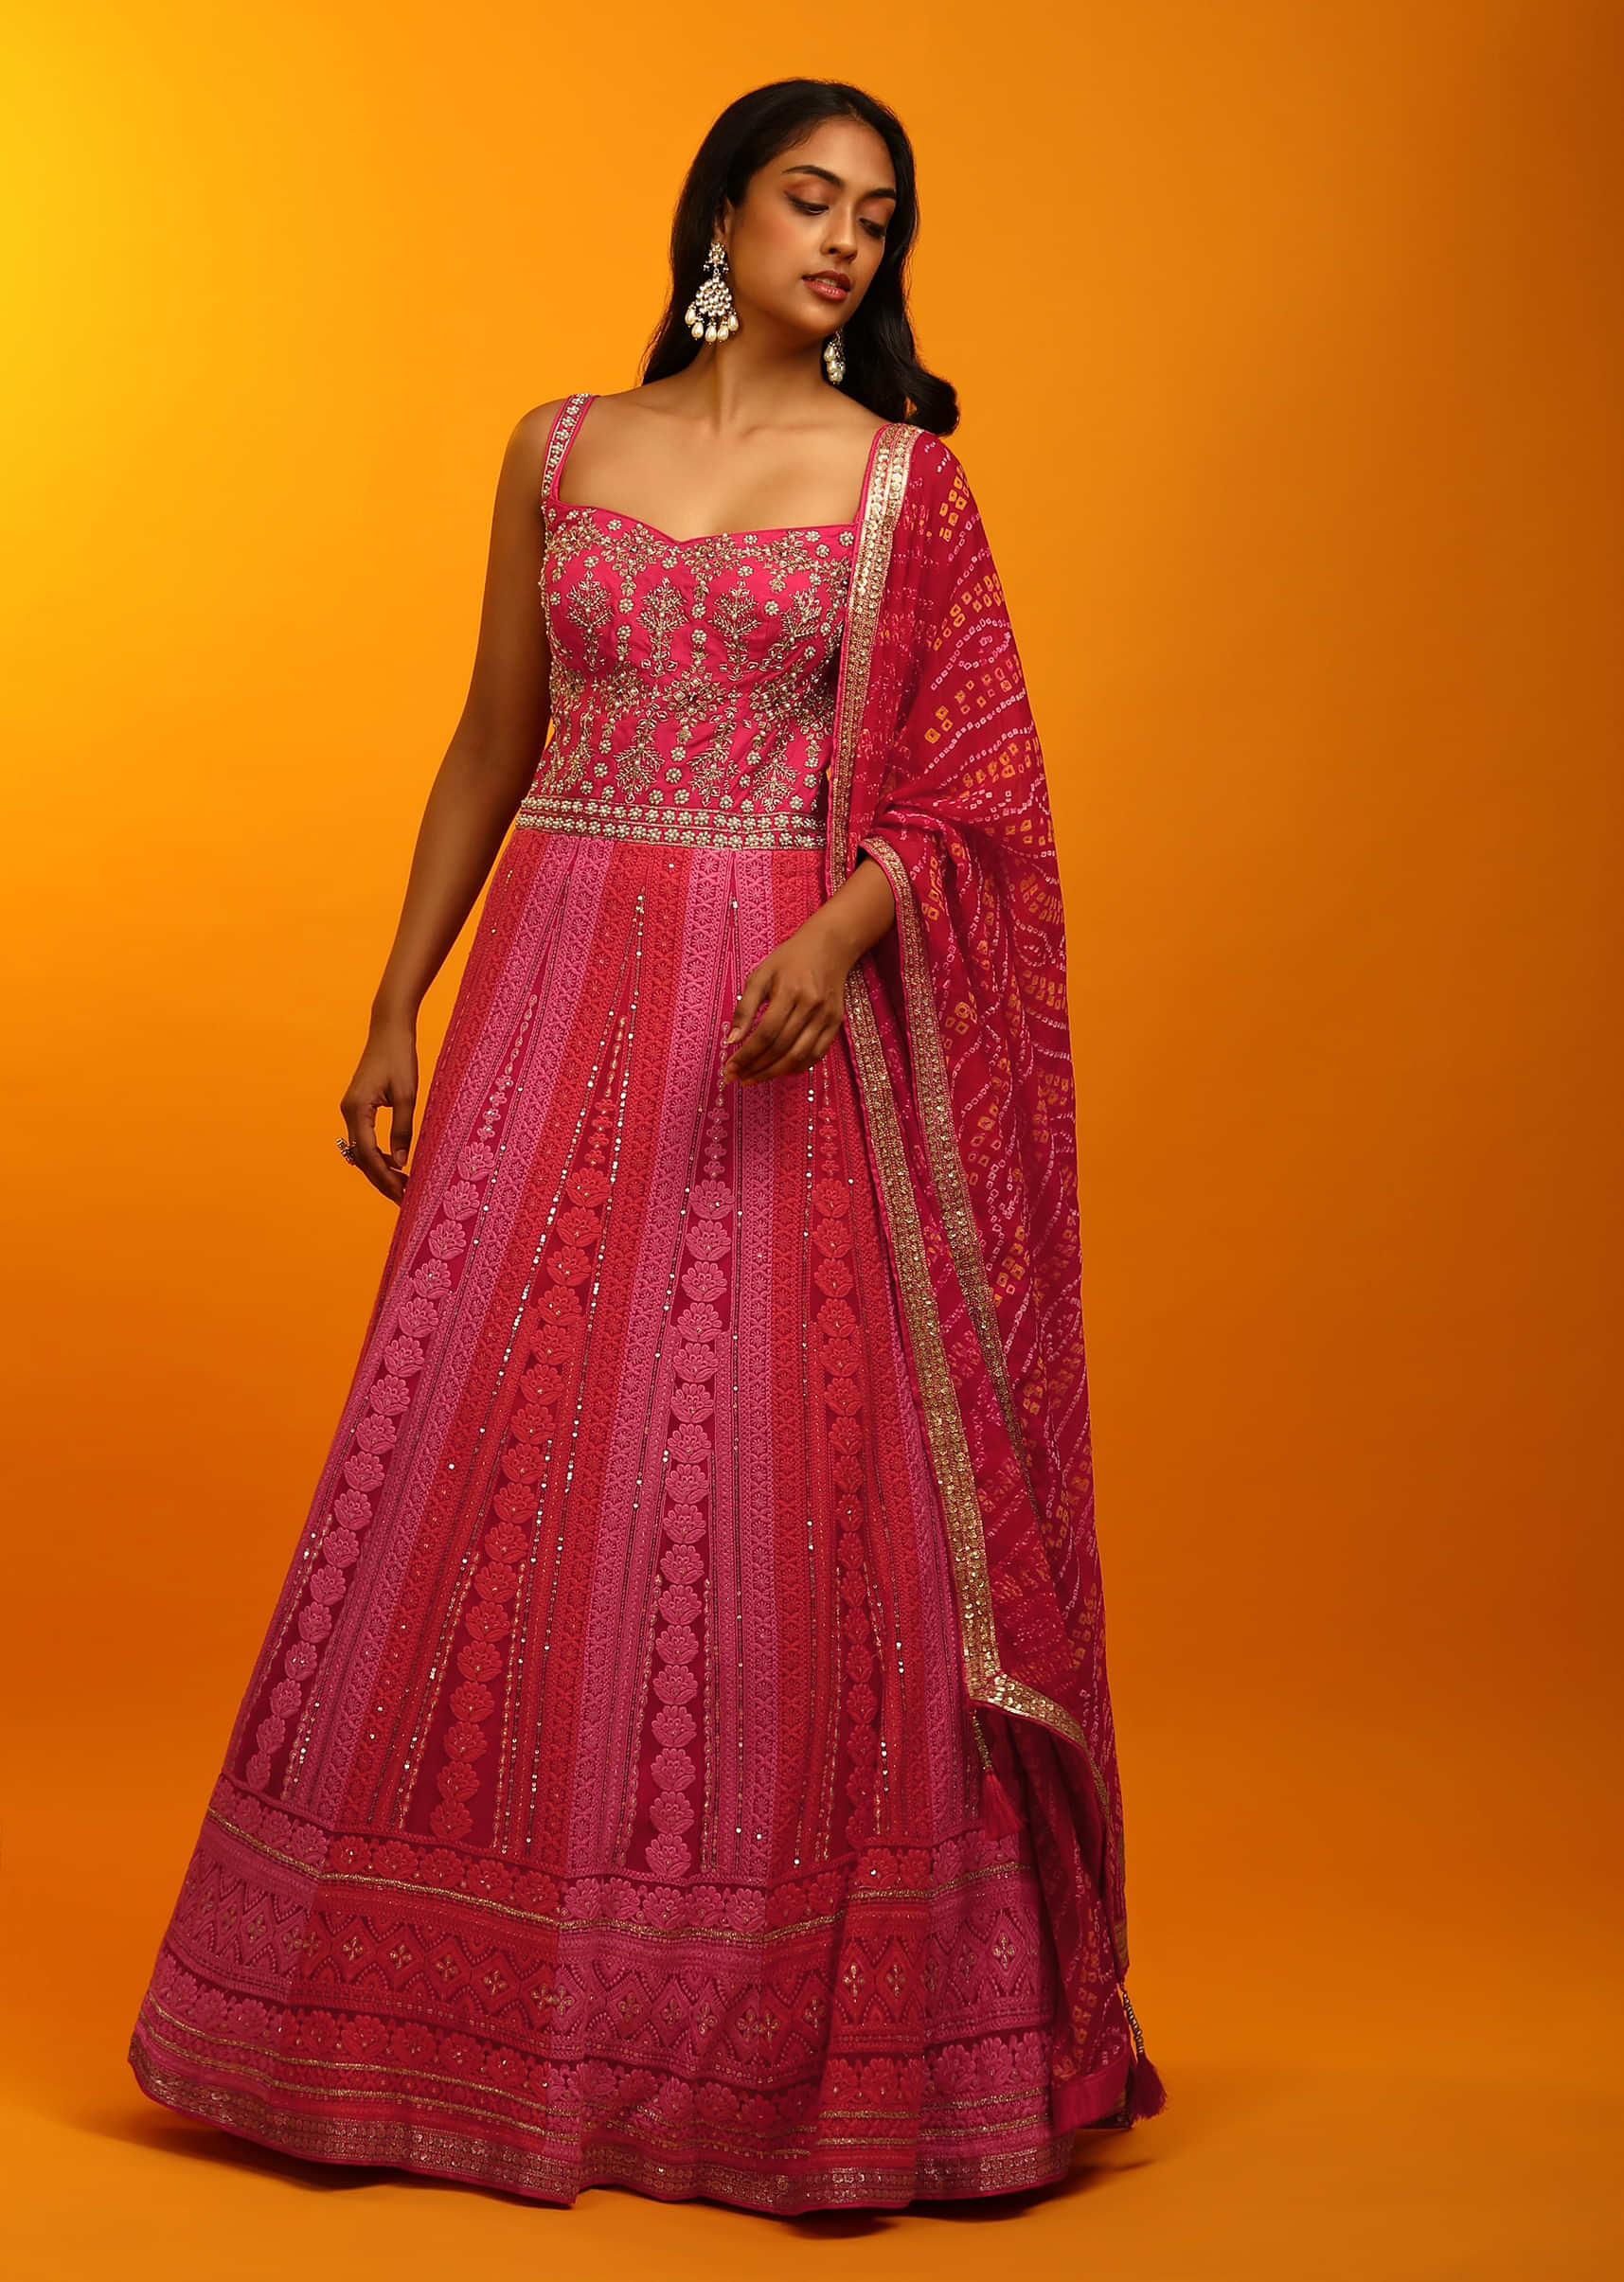 Rani Pink And Red Panel Anarkali Suit With Lucknowi Thread Embroidered Ethnic Kalis And Bandhani Dupatta